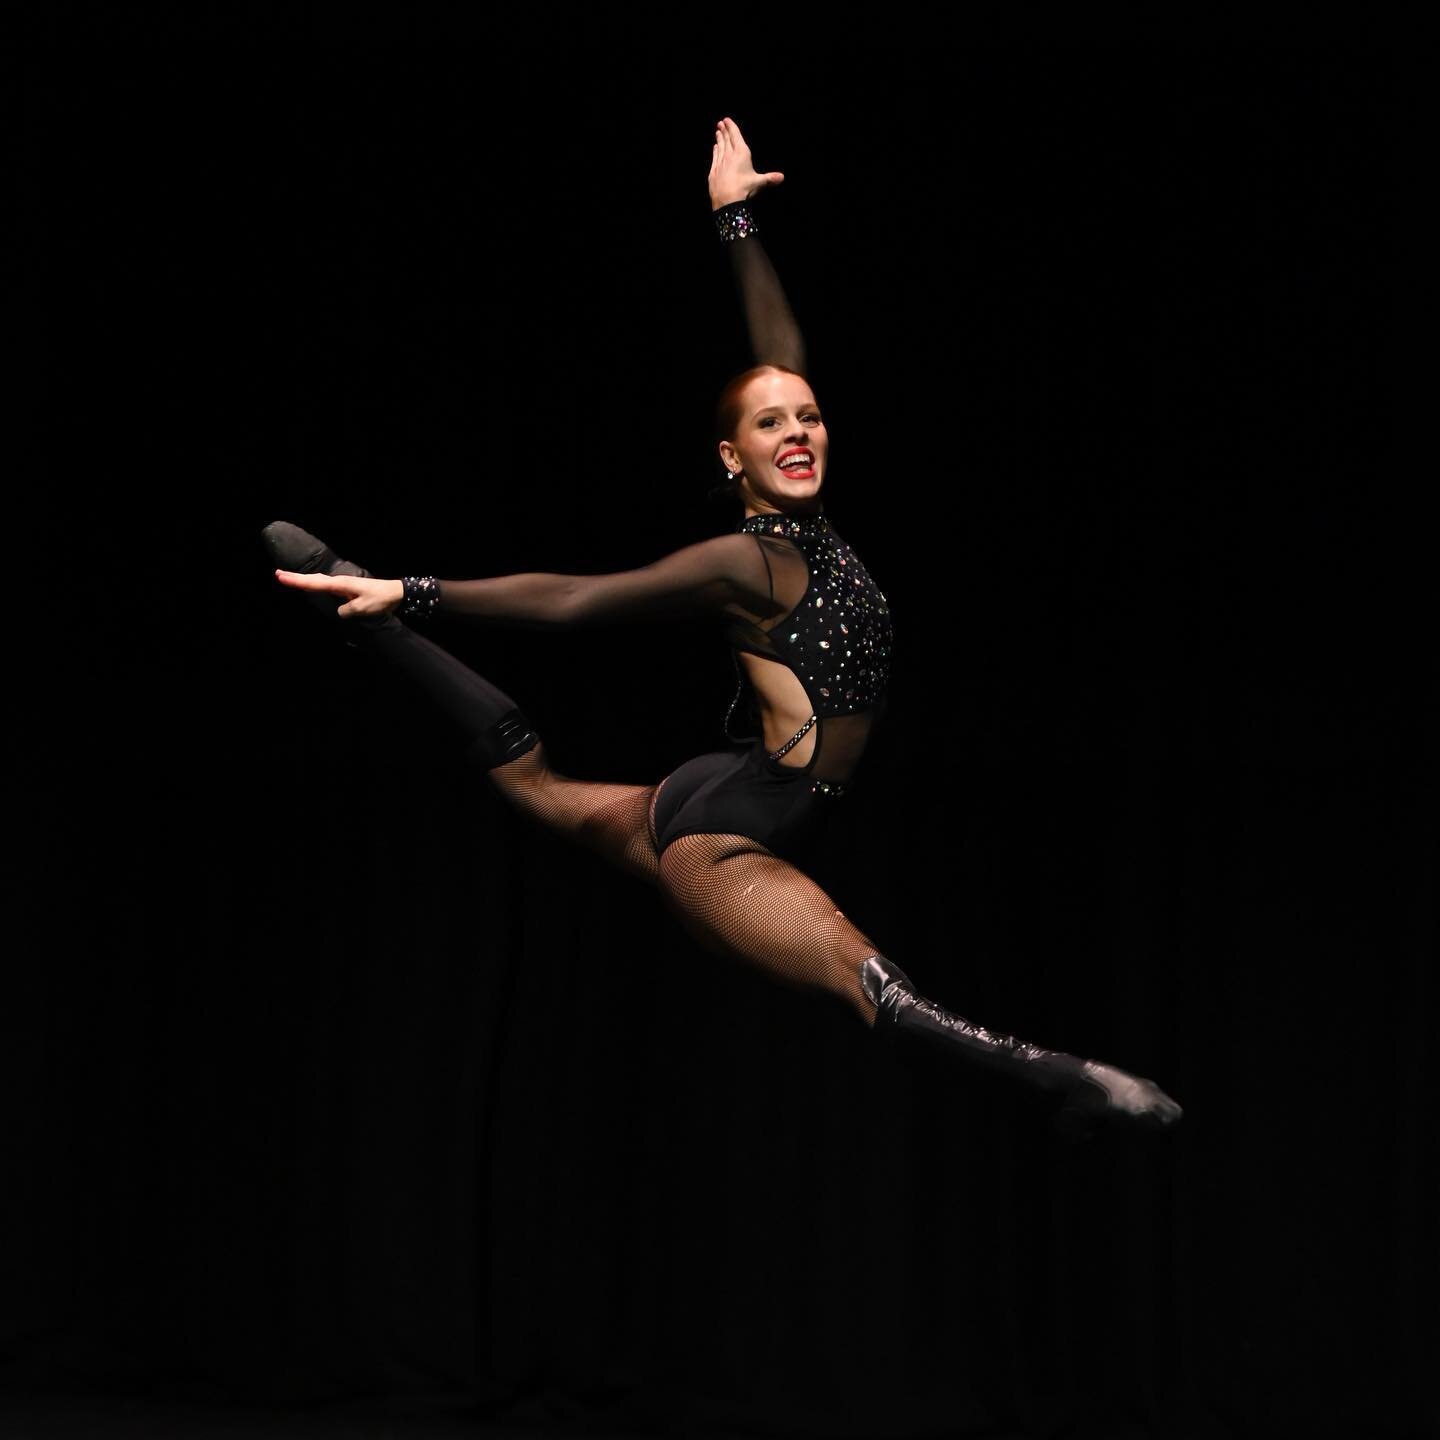 The success continues for TJS students across all ages! 

We love our powerhouse @nakiahgrossmann_! You are so versatile and born for that stage ⭐️

🥇Open Senior  Broadway 
🥇Open Song and dance 
🥈Open Senior hip hop 
🥈 Open Senior Demi Character
